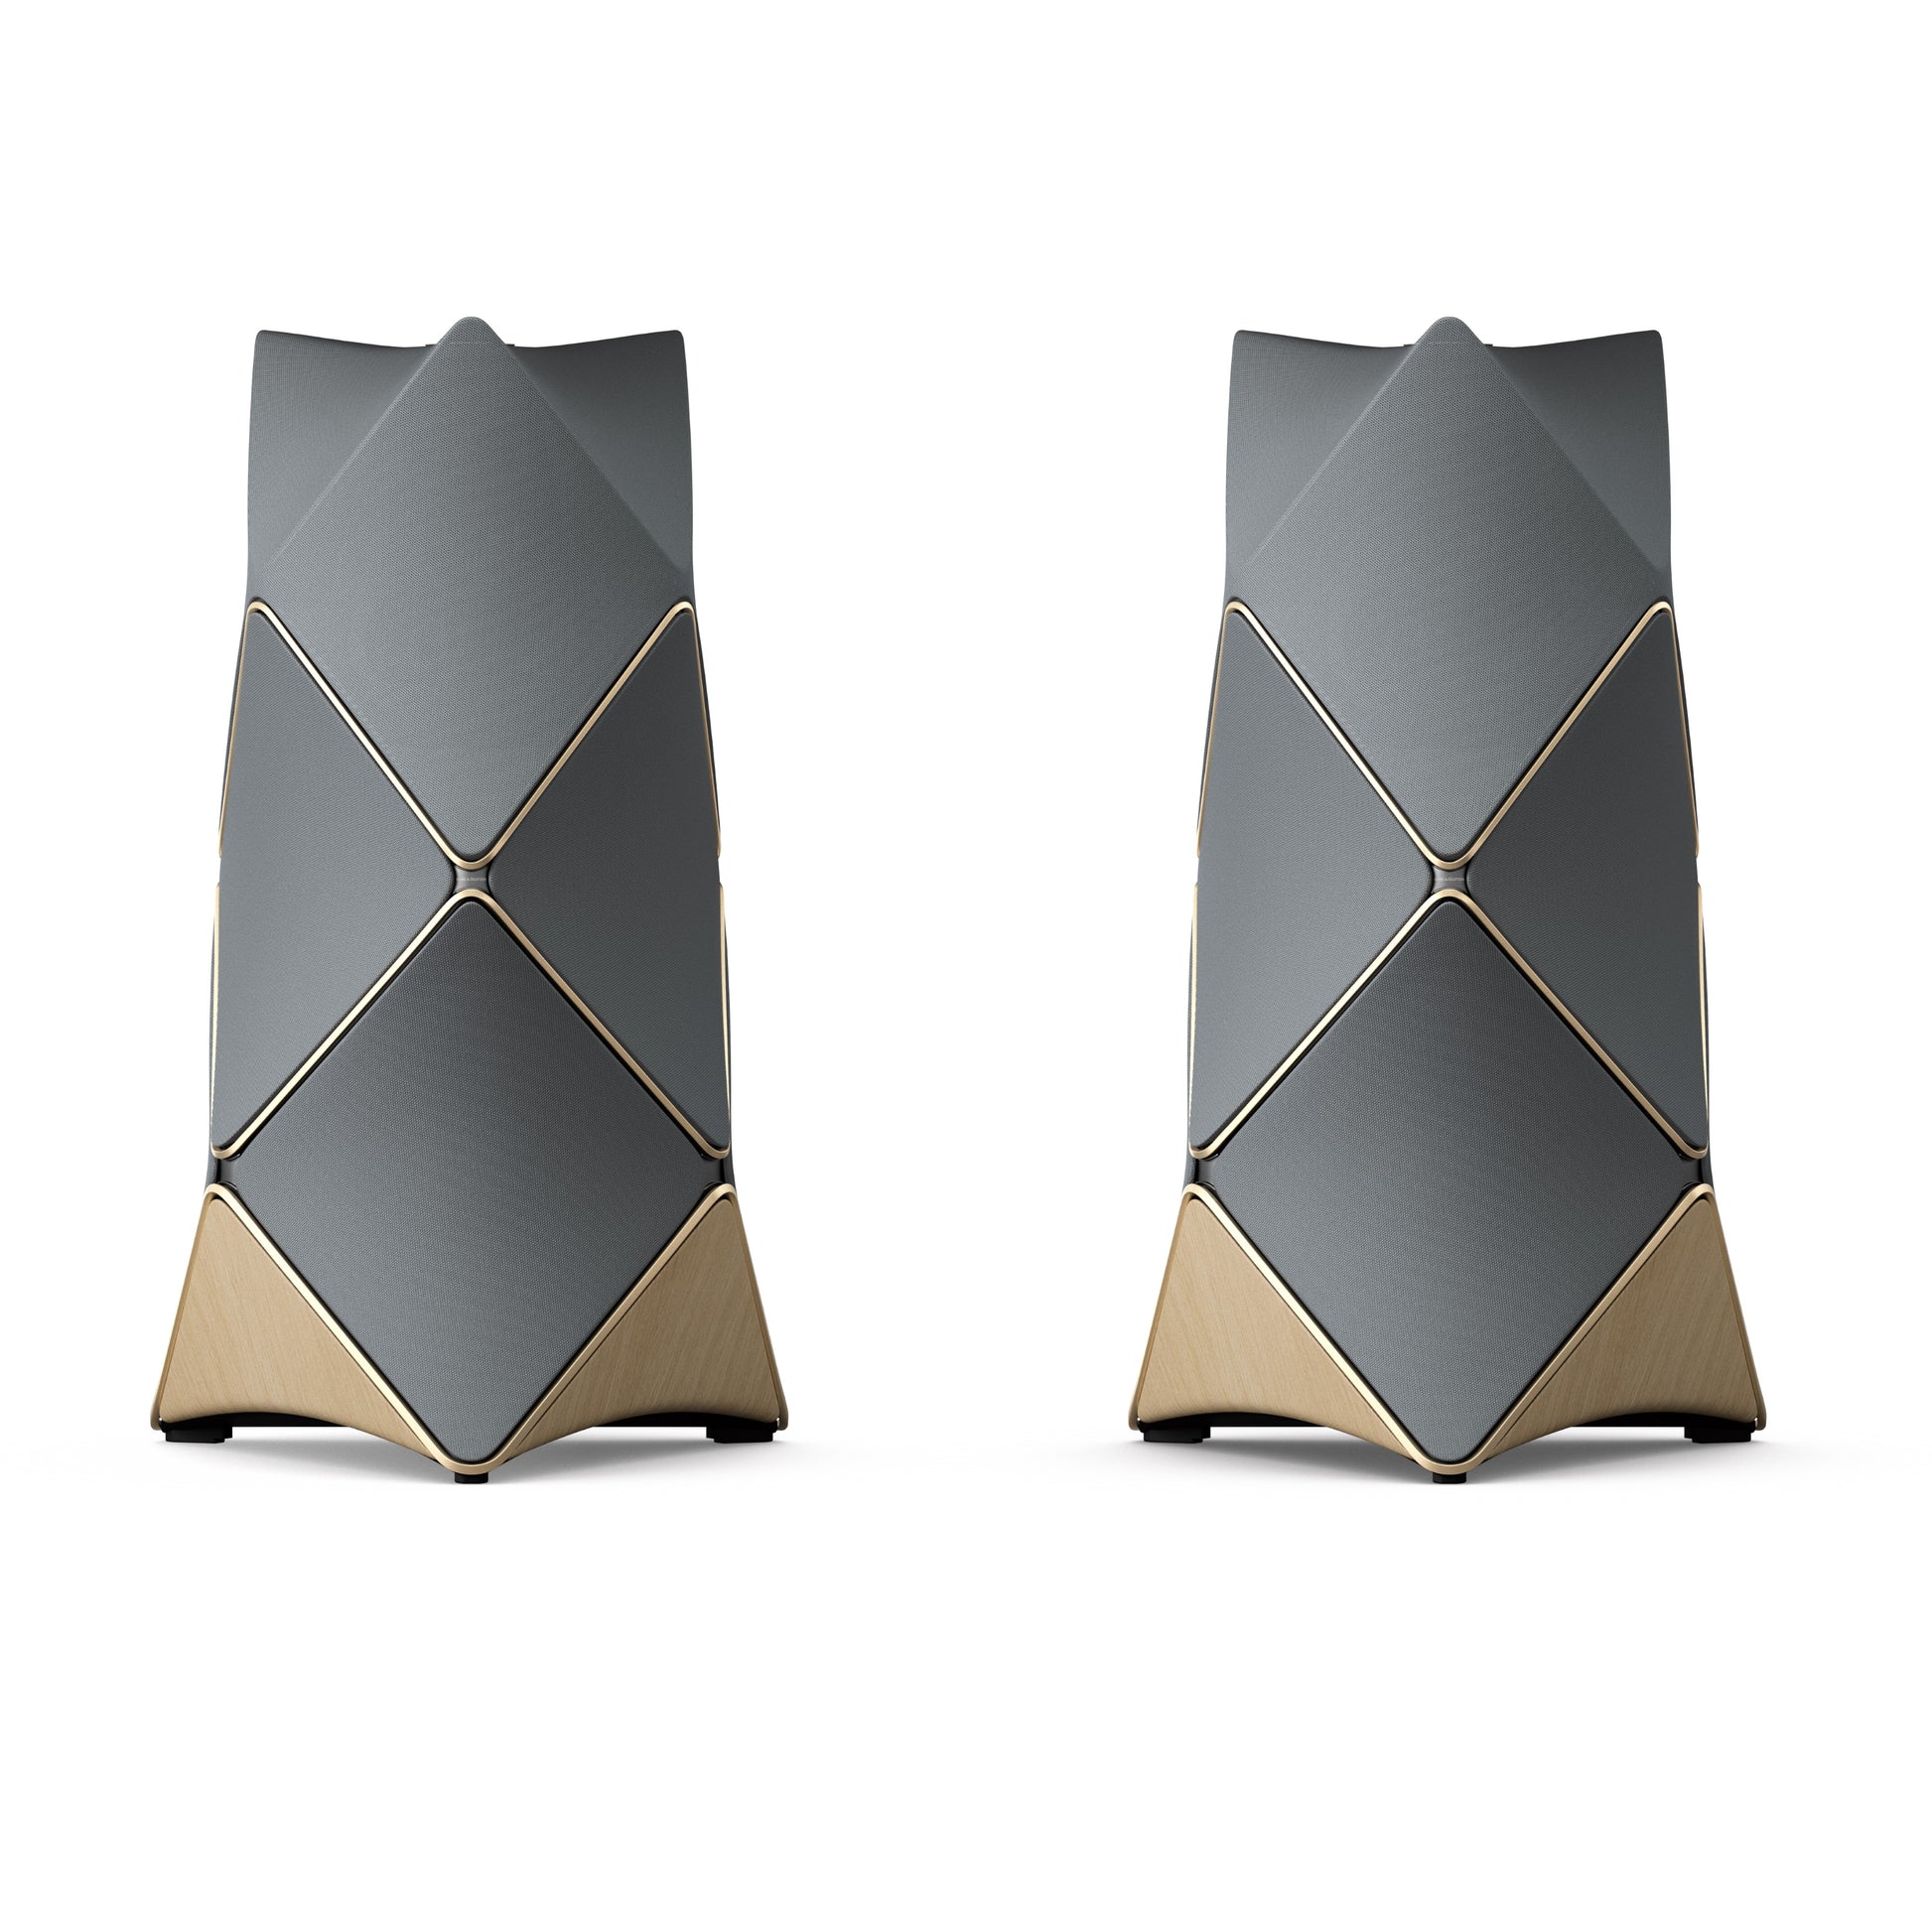 Bang & Olufsen BeoLab 90 Limited Edition - A tribute to